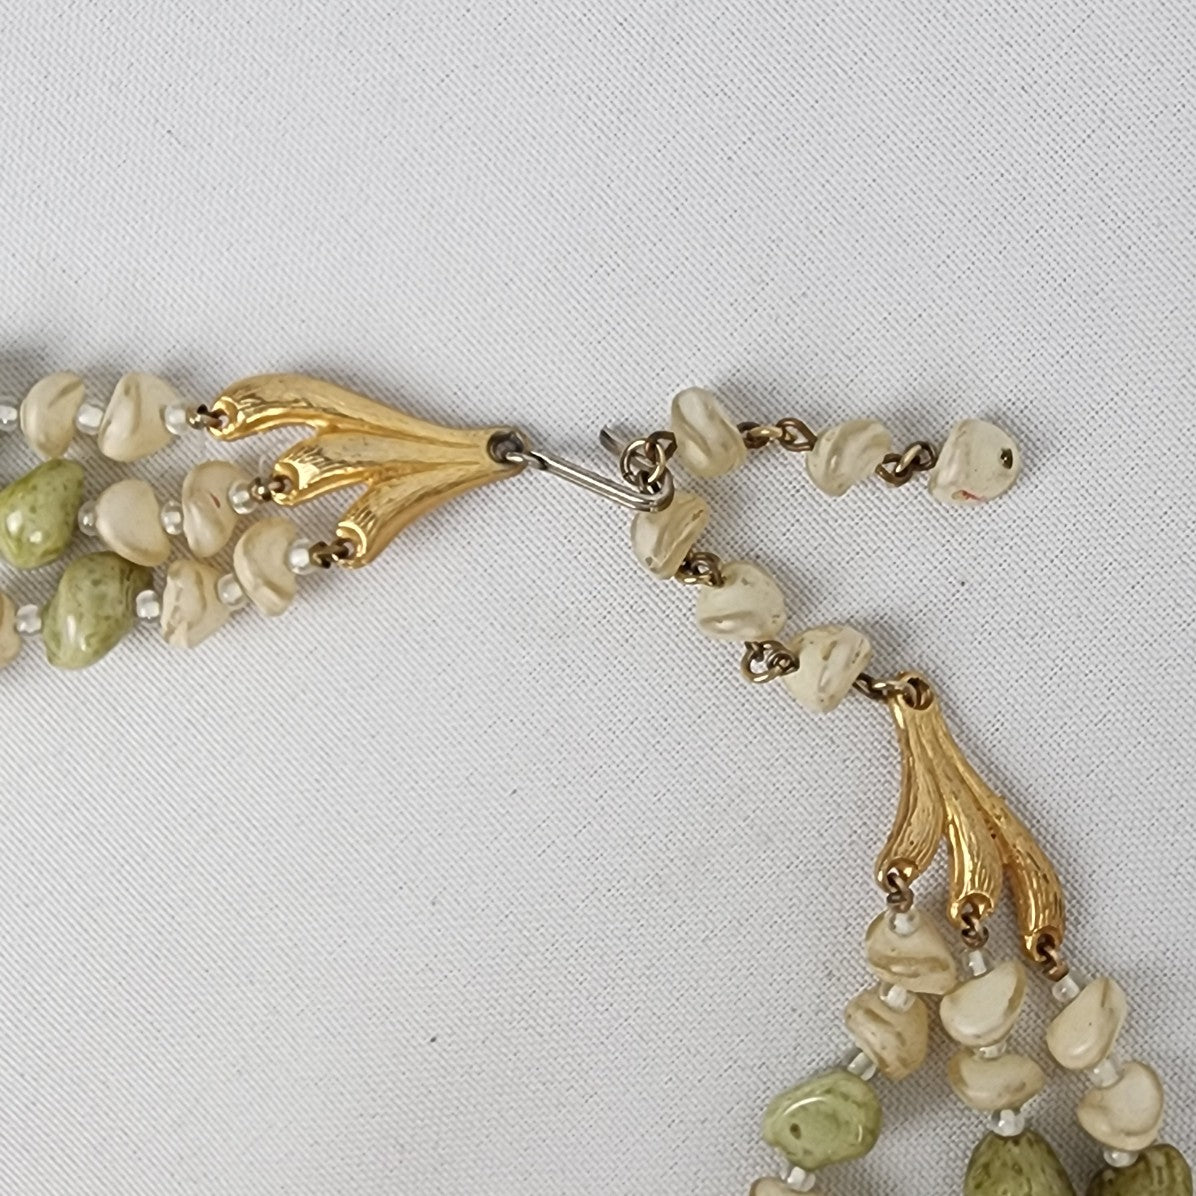 Vintage Green & Cream Polished Stone Beaded Layered Necklace